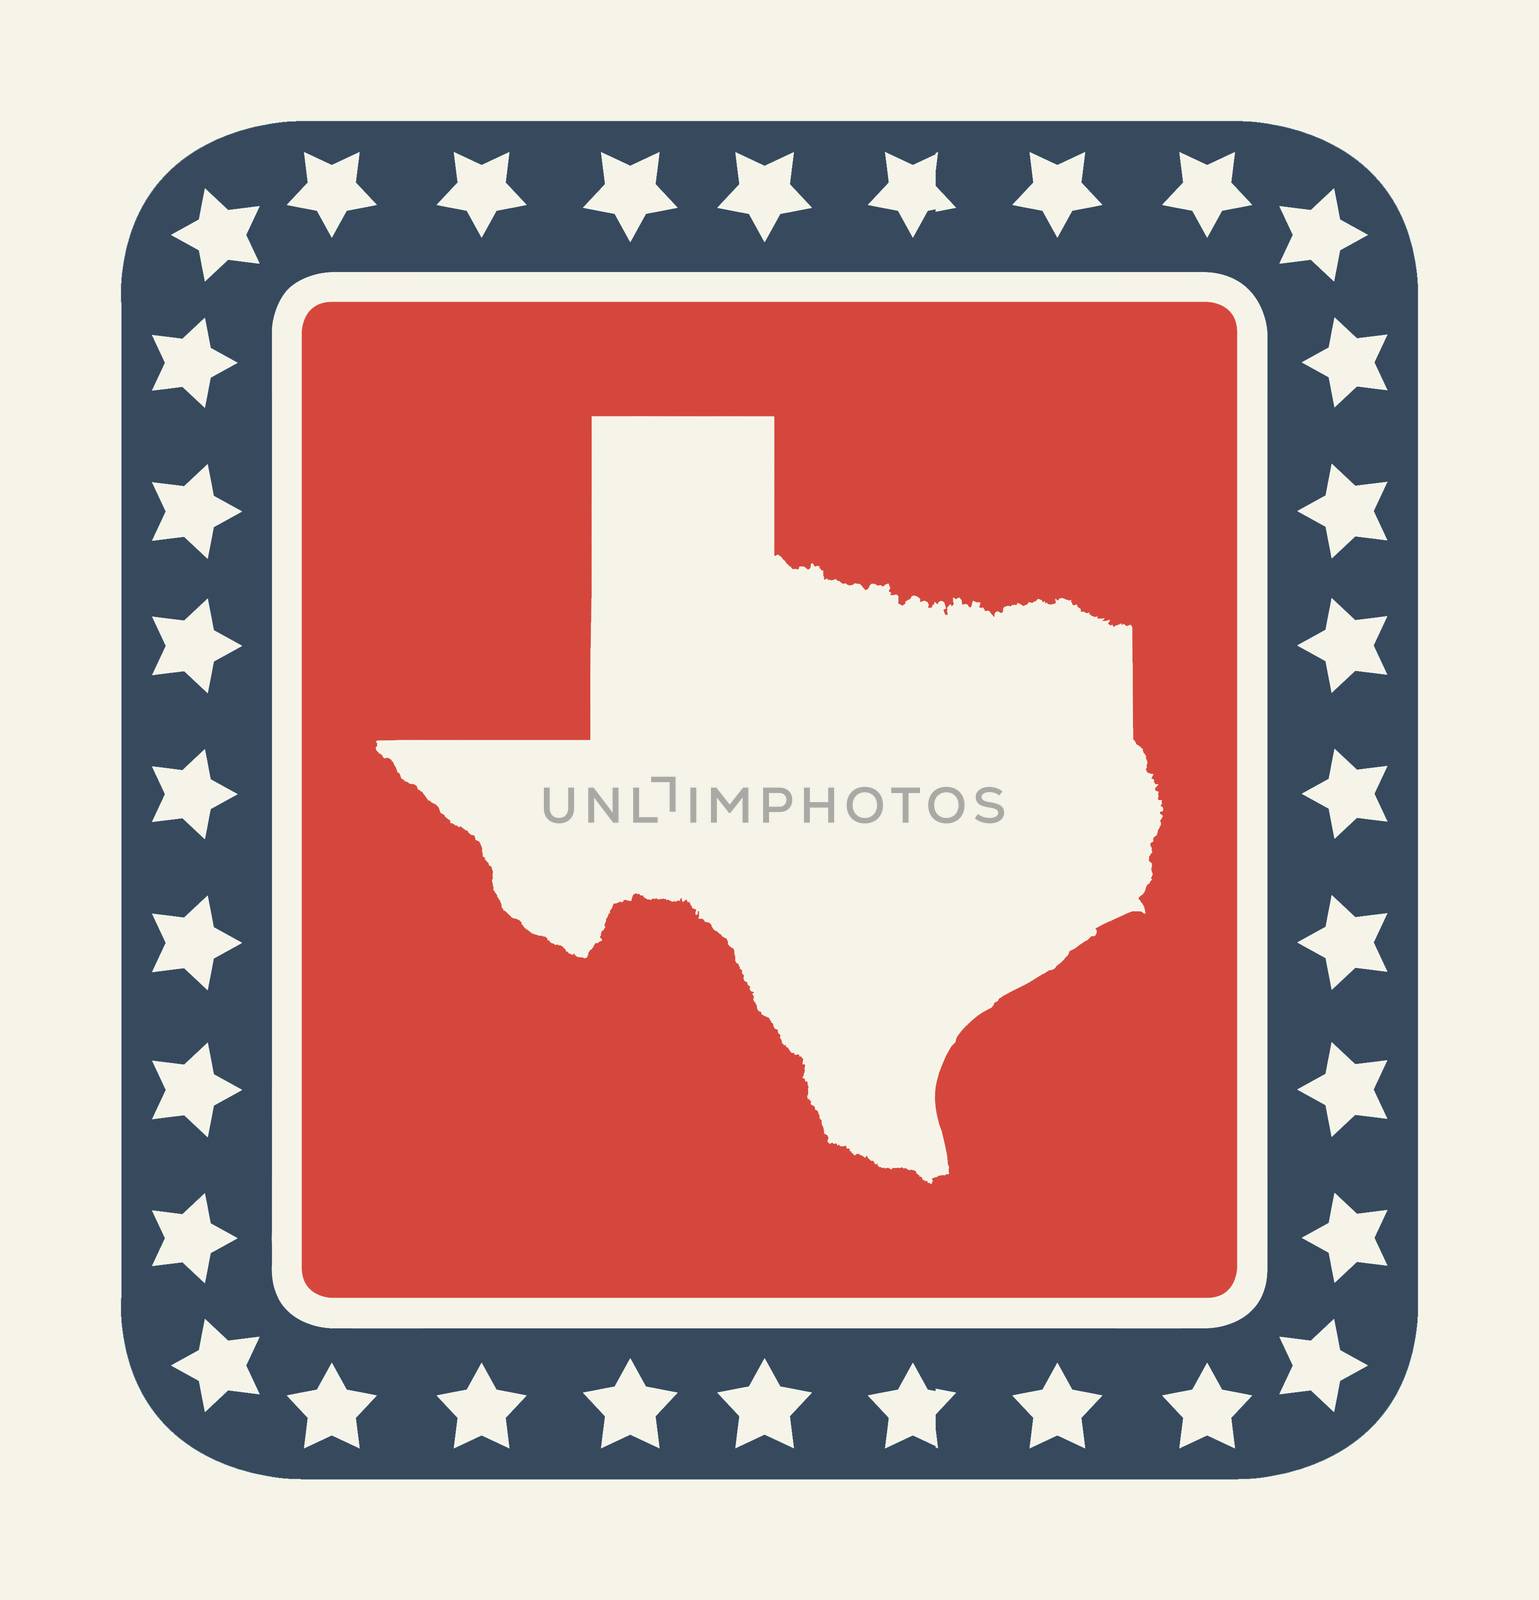 Texas state button on American flag in flat web design style, isolated on white background.